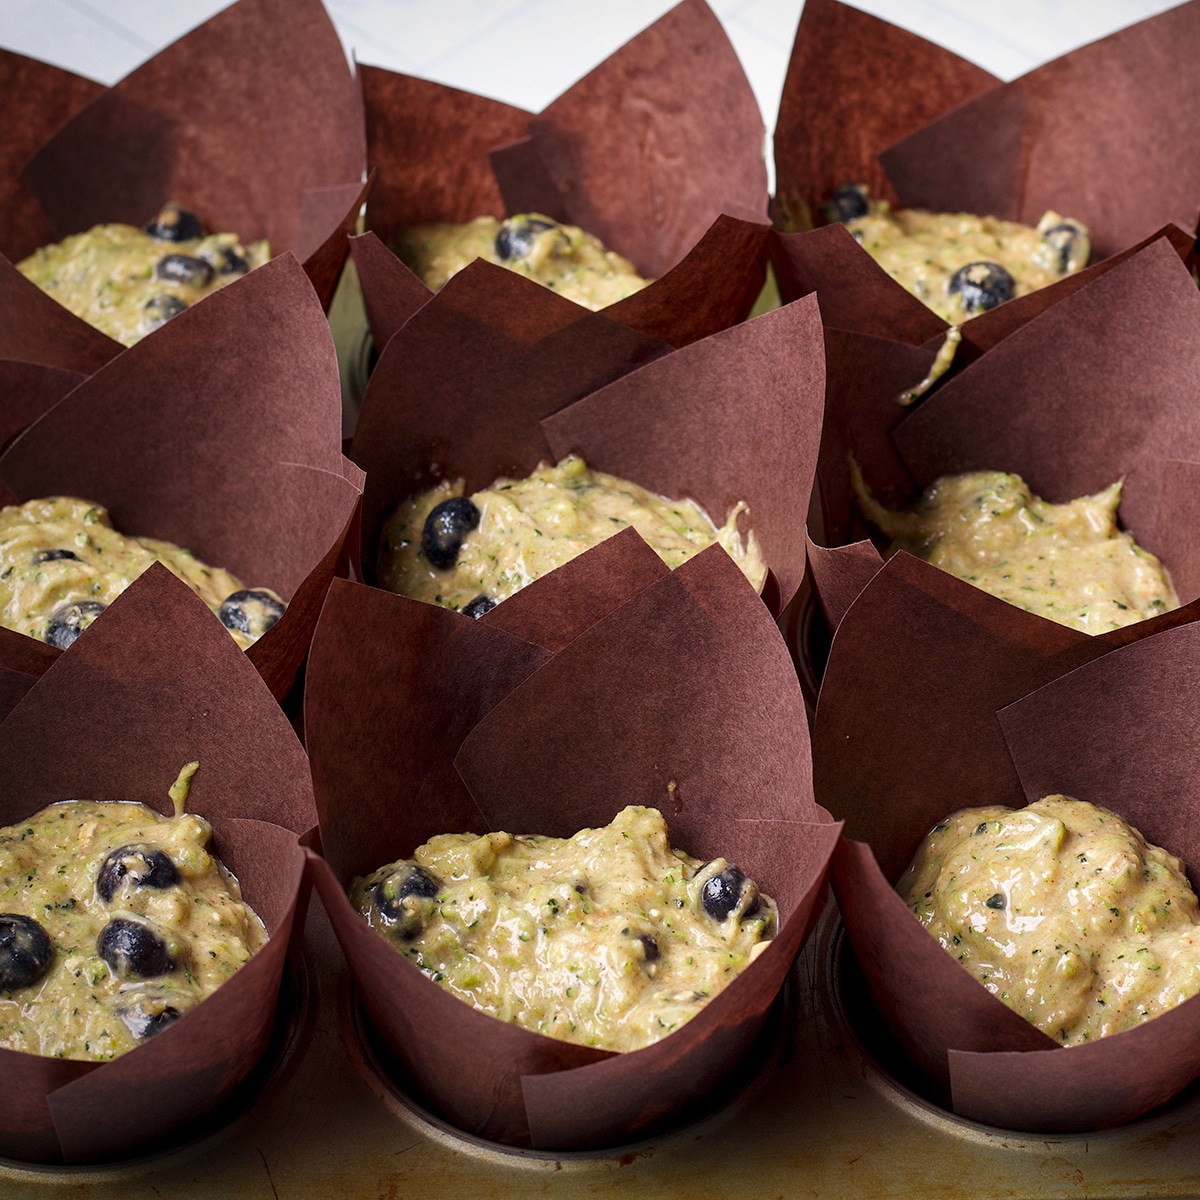 A muffin tray lined with tulip baking cups that are filled with zucchini blueberry muffin batter.